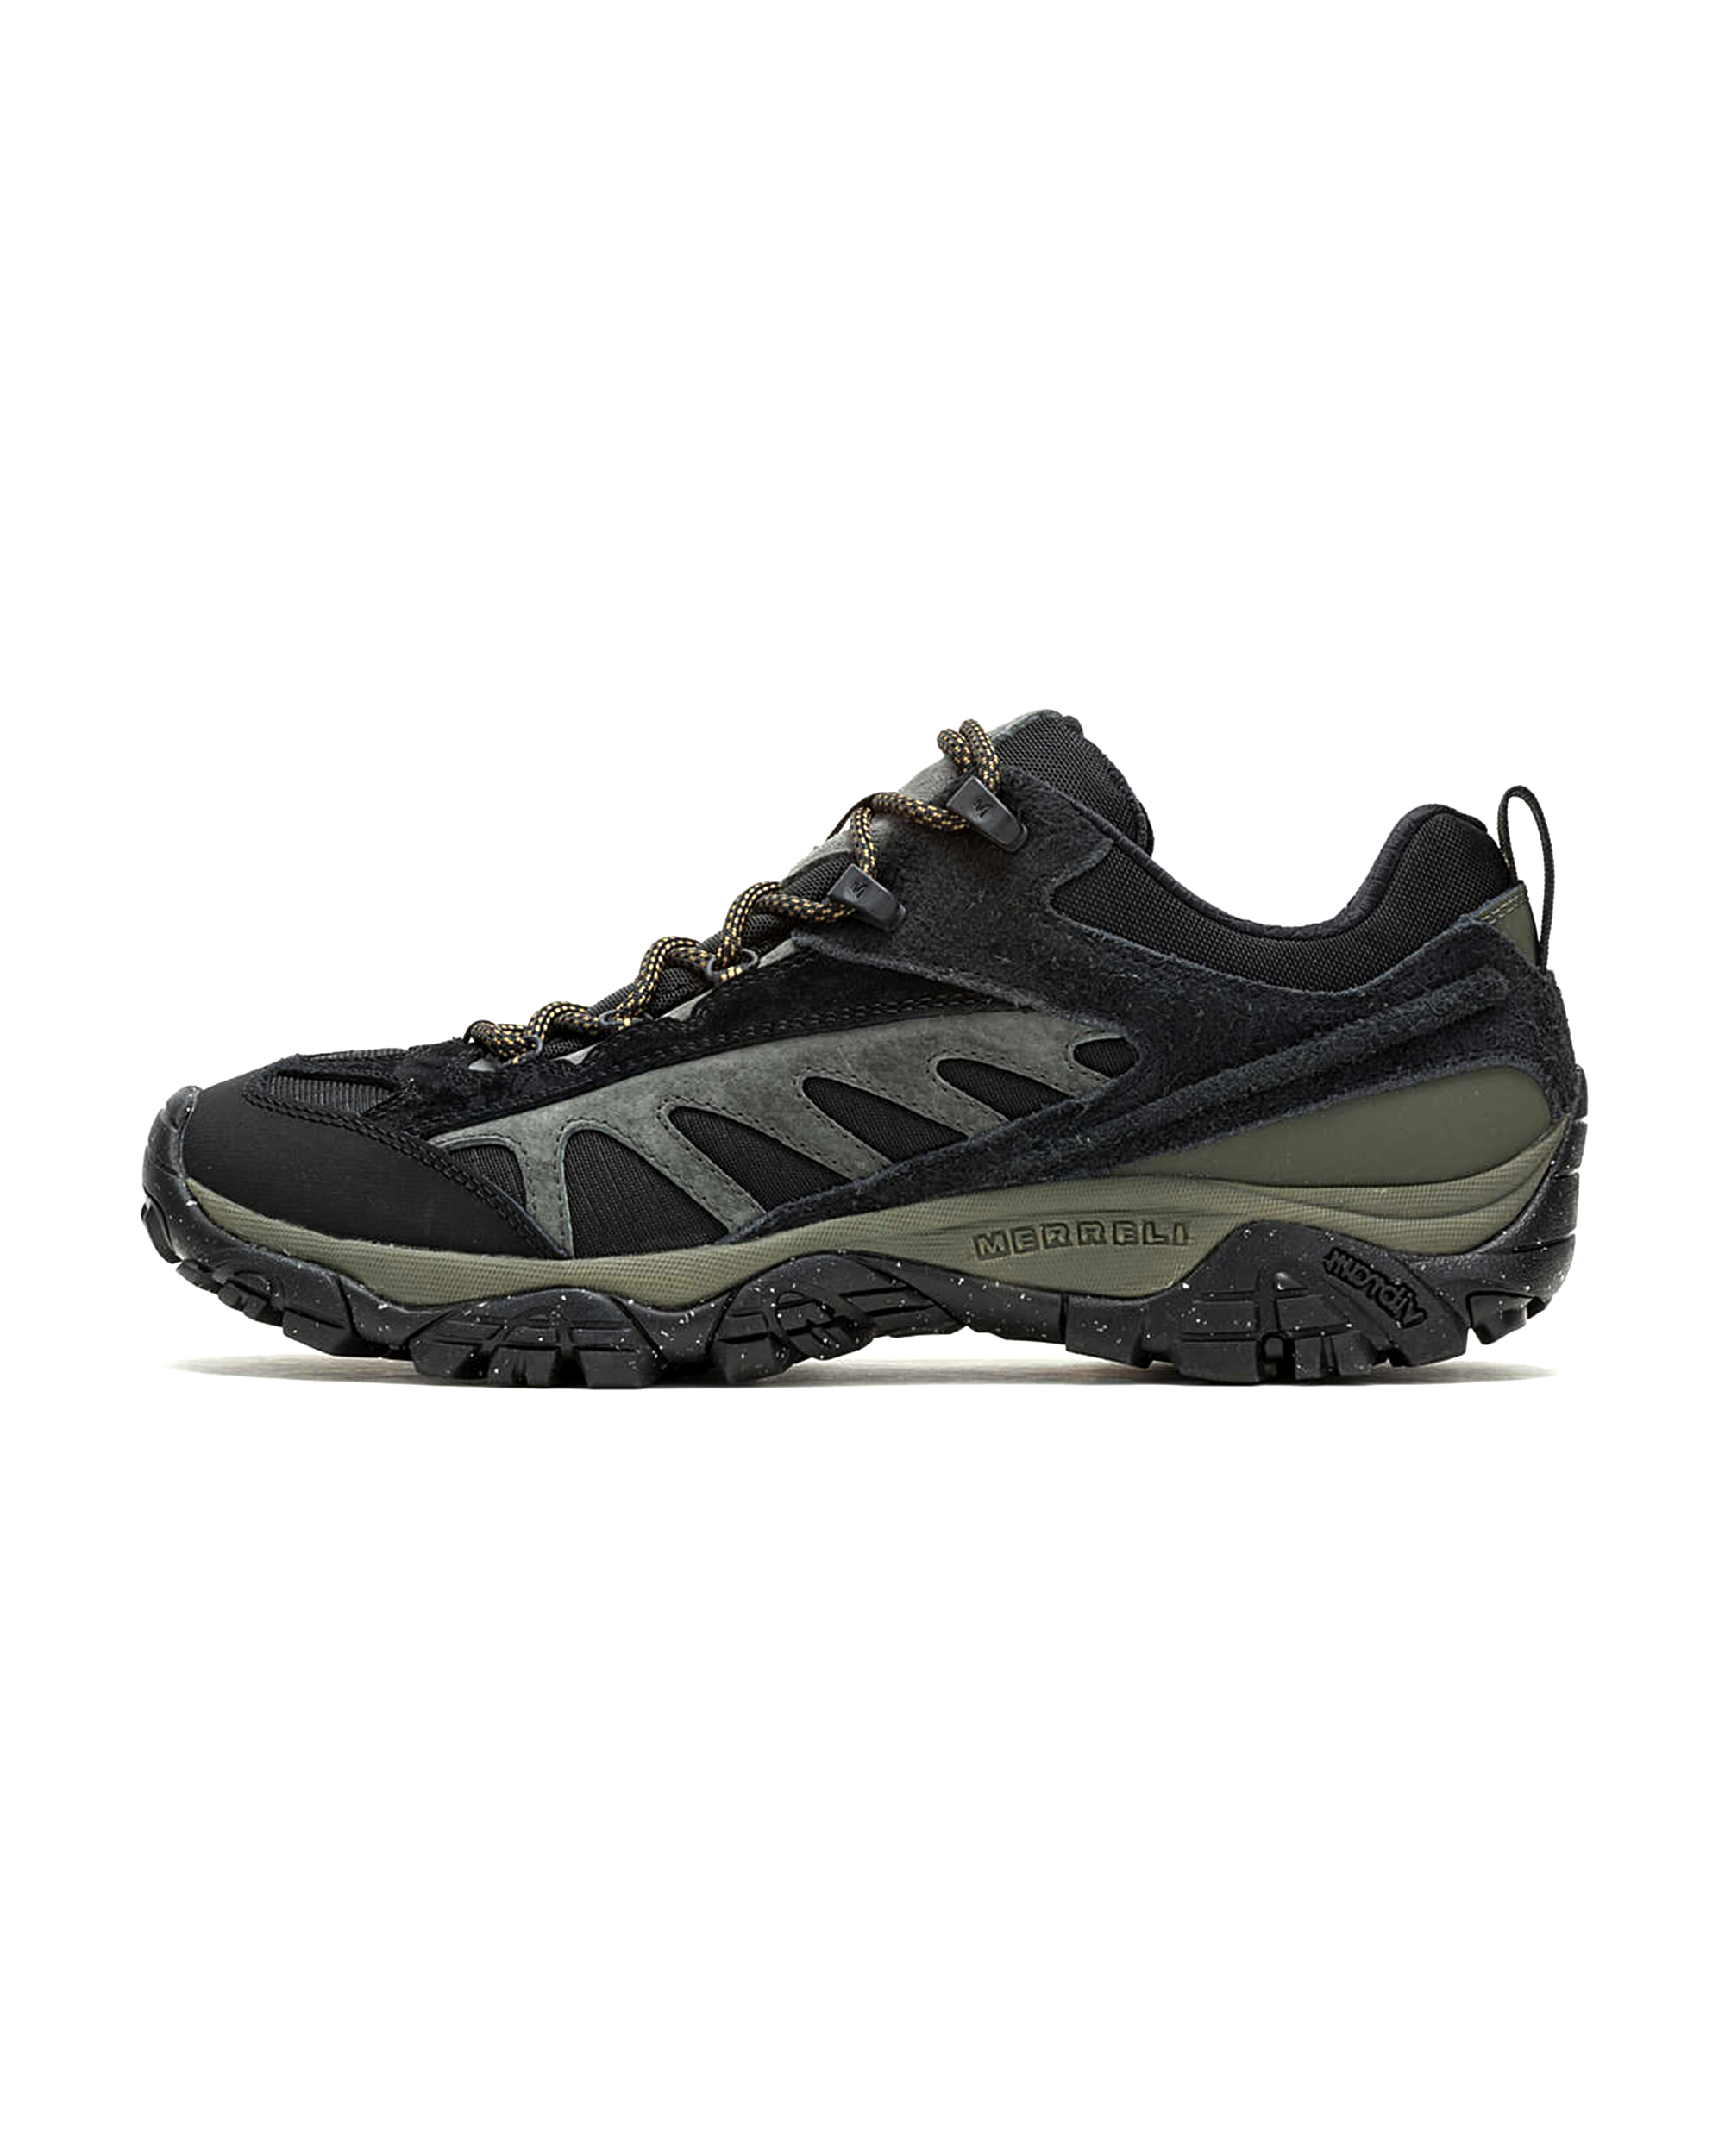 Moab Mesa Luxe 1 TRL - Black / Olive